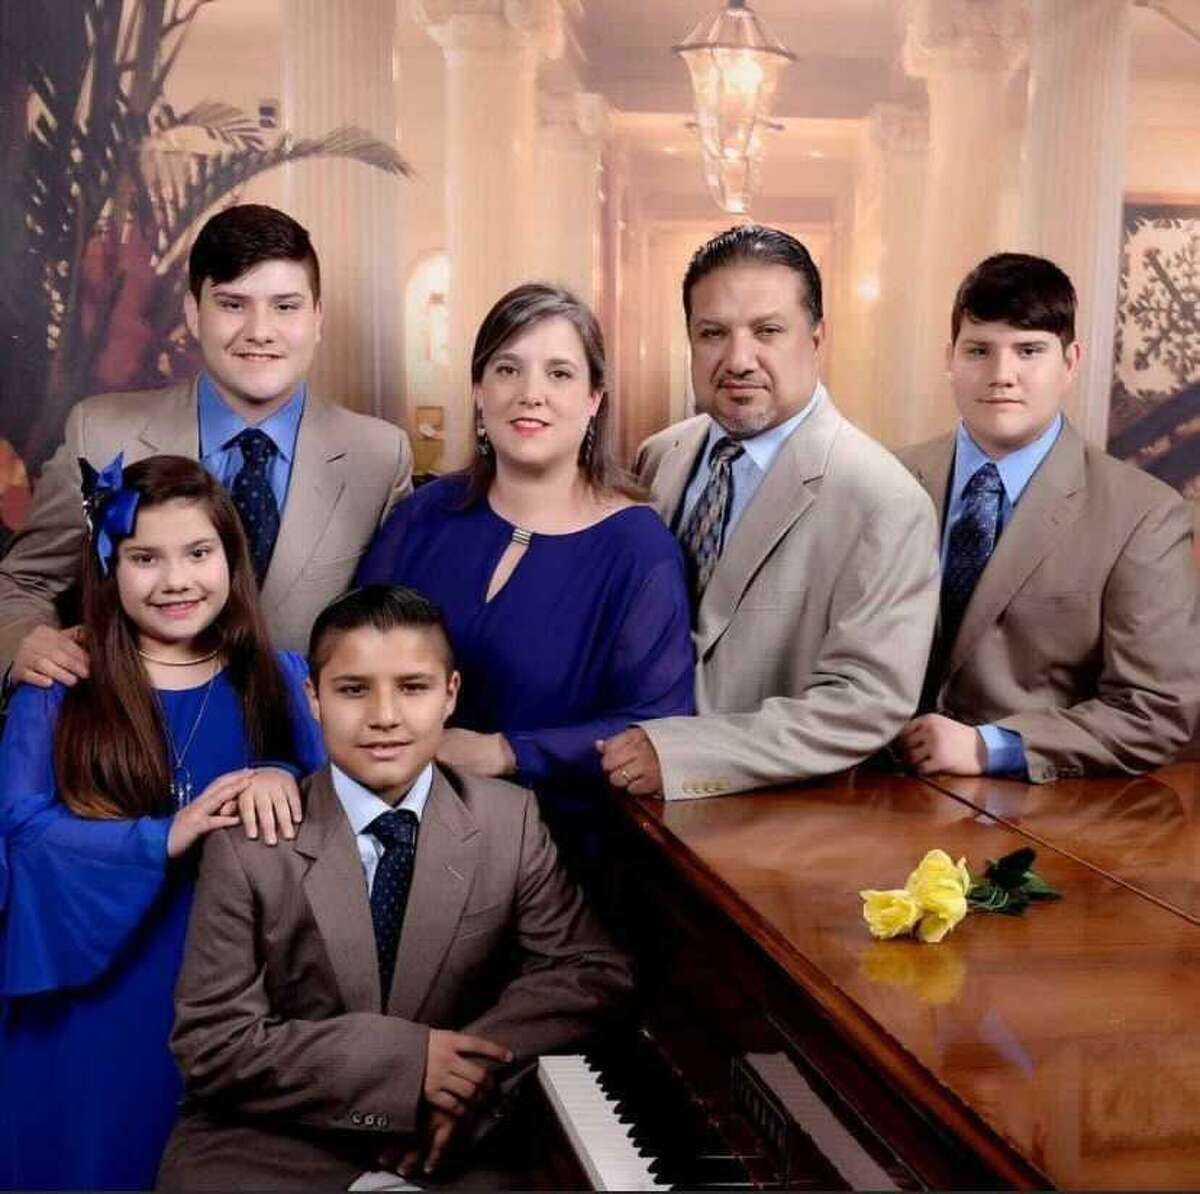 Lydia and Lawrence Rodriguez of La Marque, Texas both recently passed away from a battle with COVID-19. They are survived by their four children.